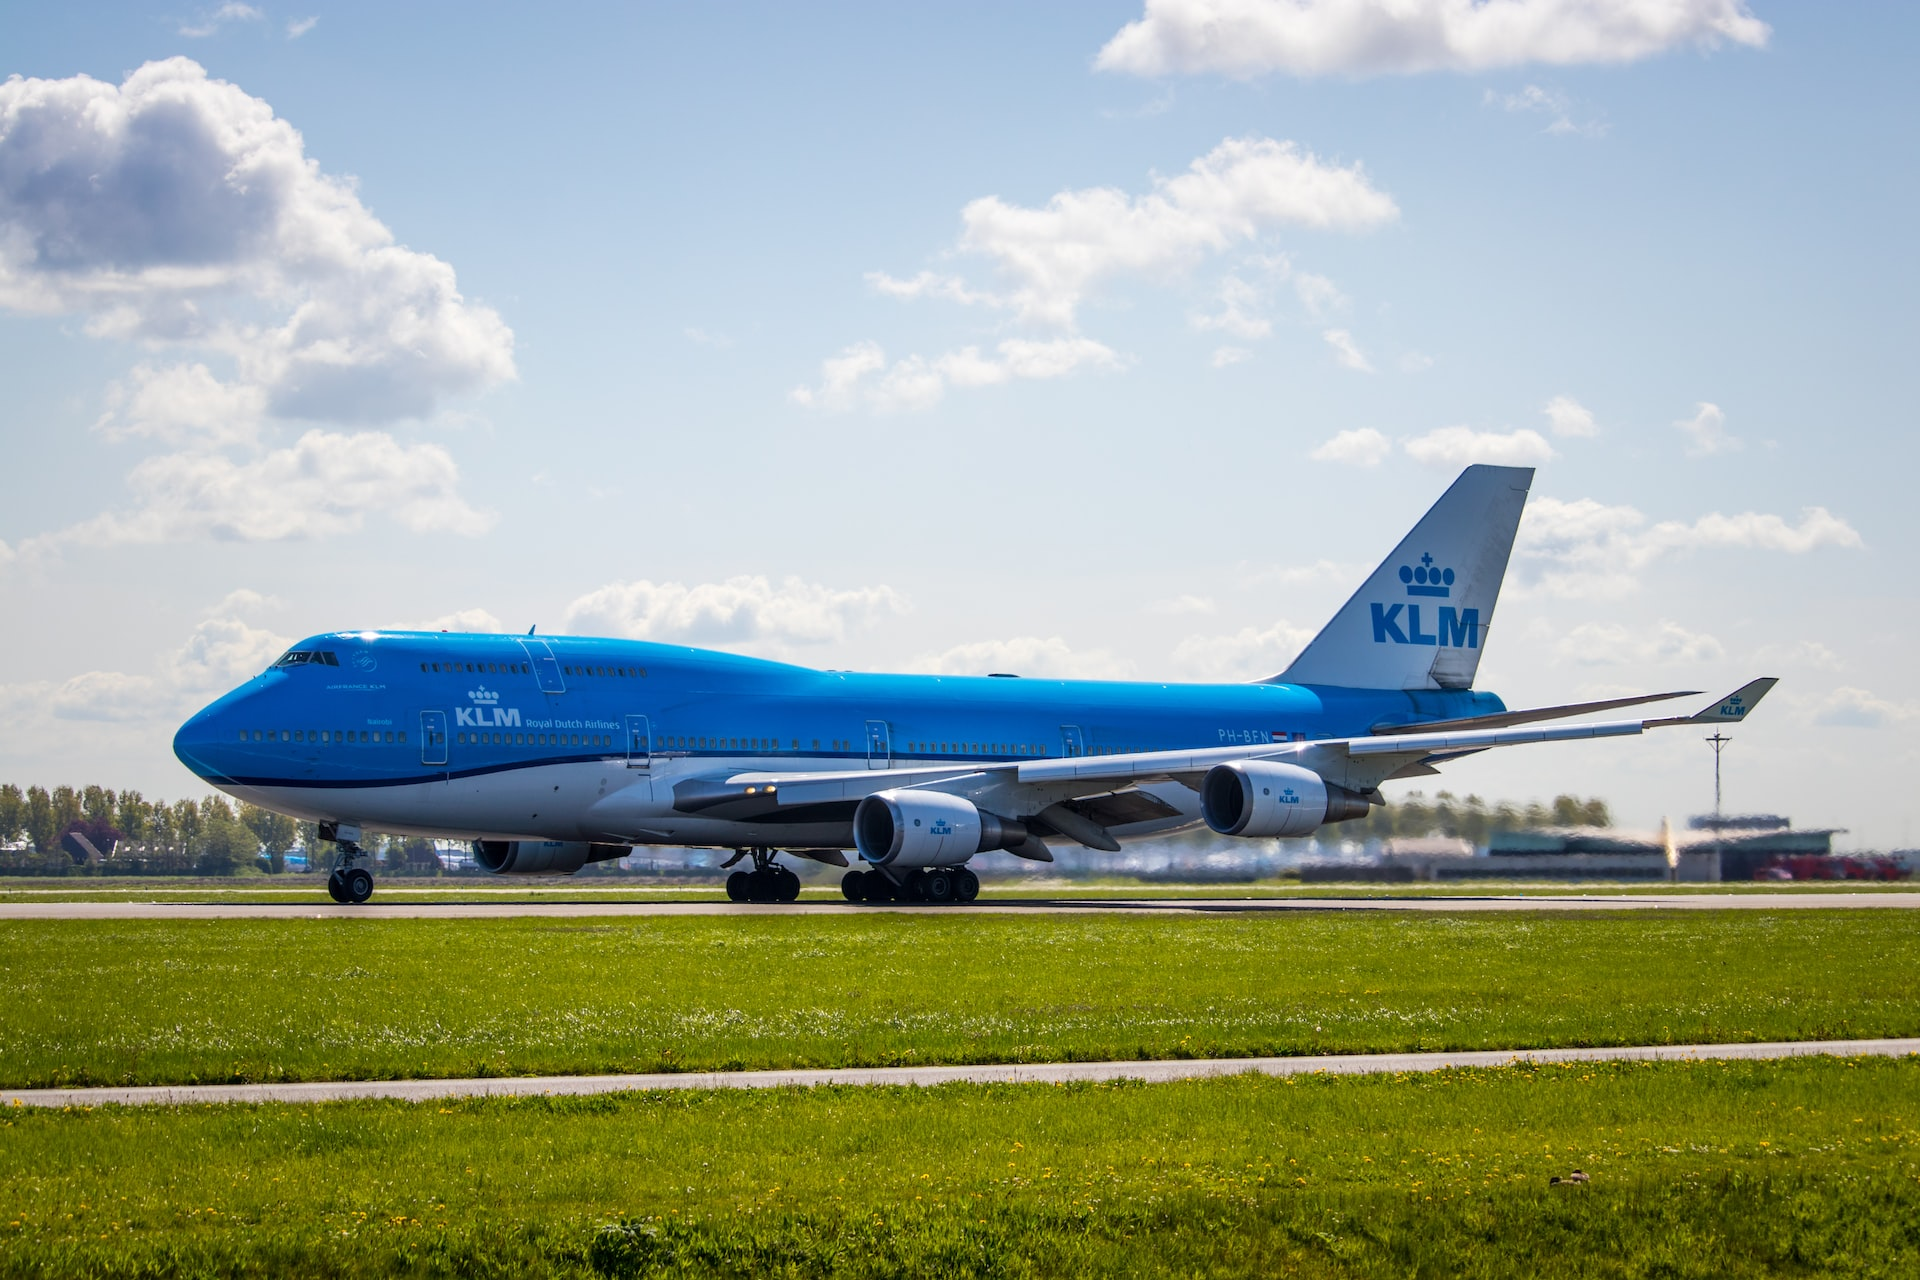 KLM Boeing 747 ready for take off on the runway.